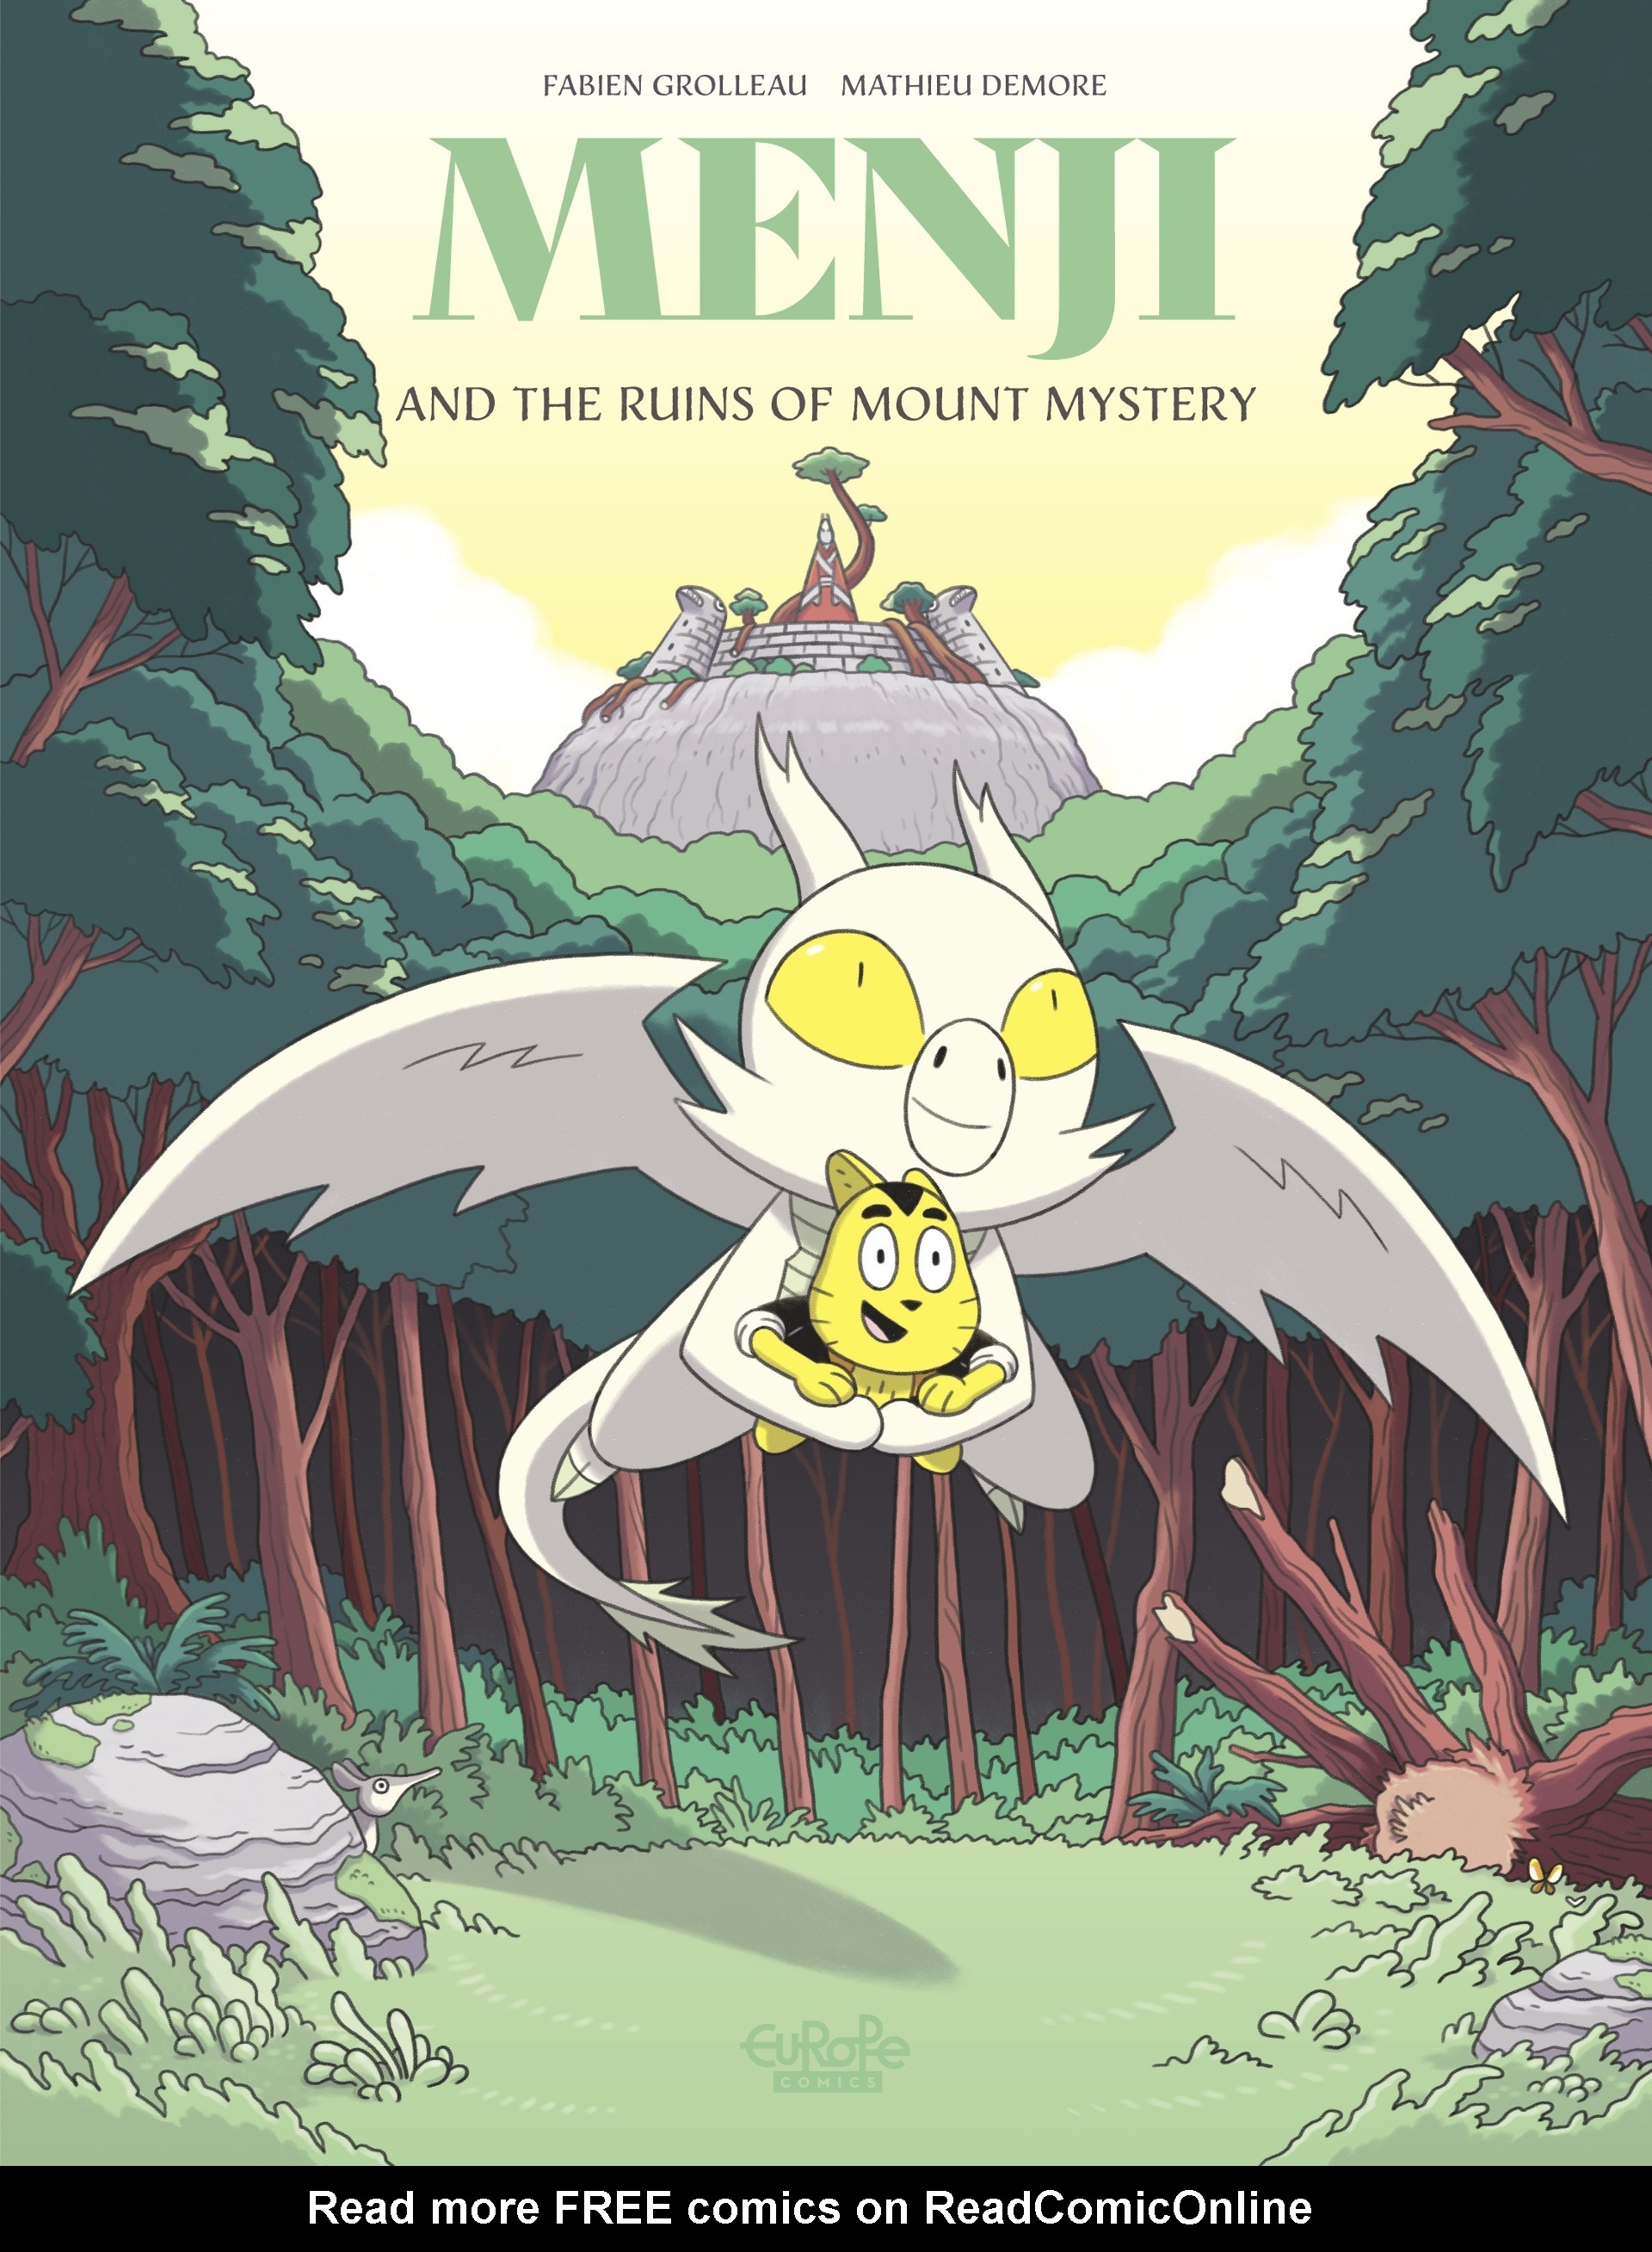 Read online Menji and the Ruins of Mount Mystery comic -  Issue # Full - 1